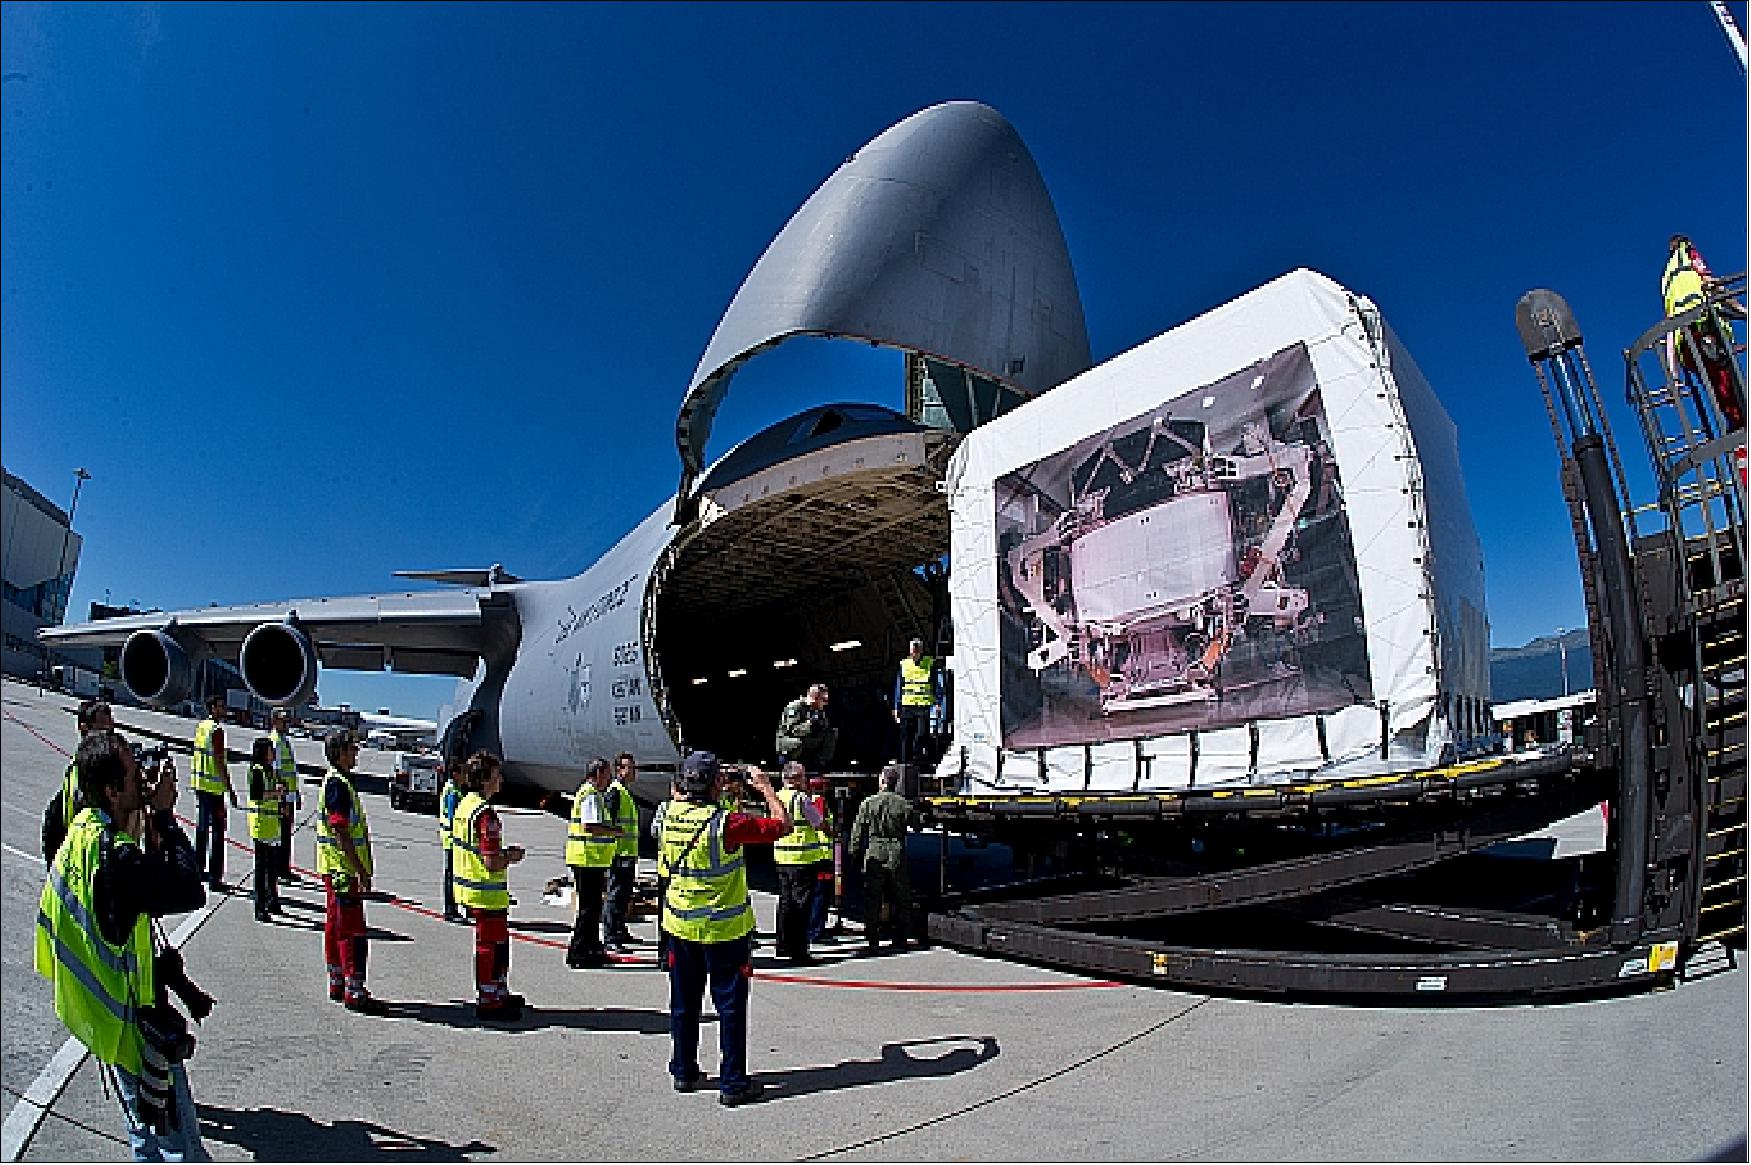 Figure 53: AMS-02 loaded onto the US Air Force C-5 Galaxy aircraft (image credit: ESA)